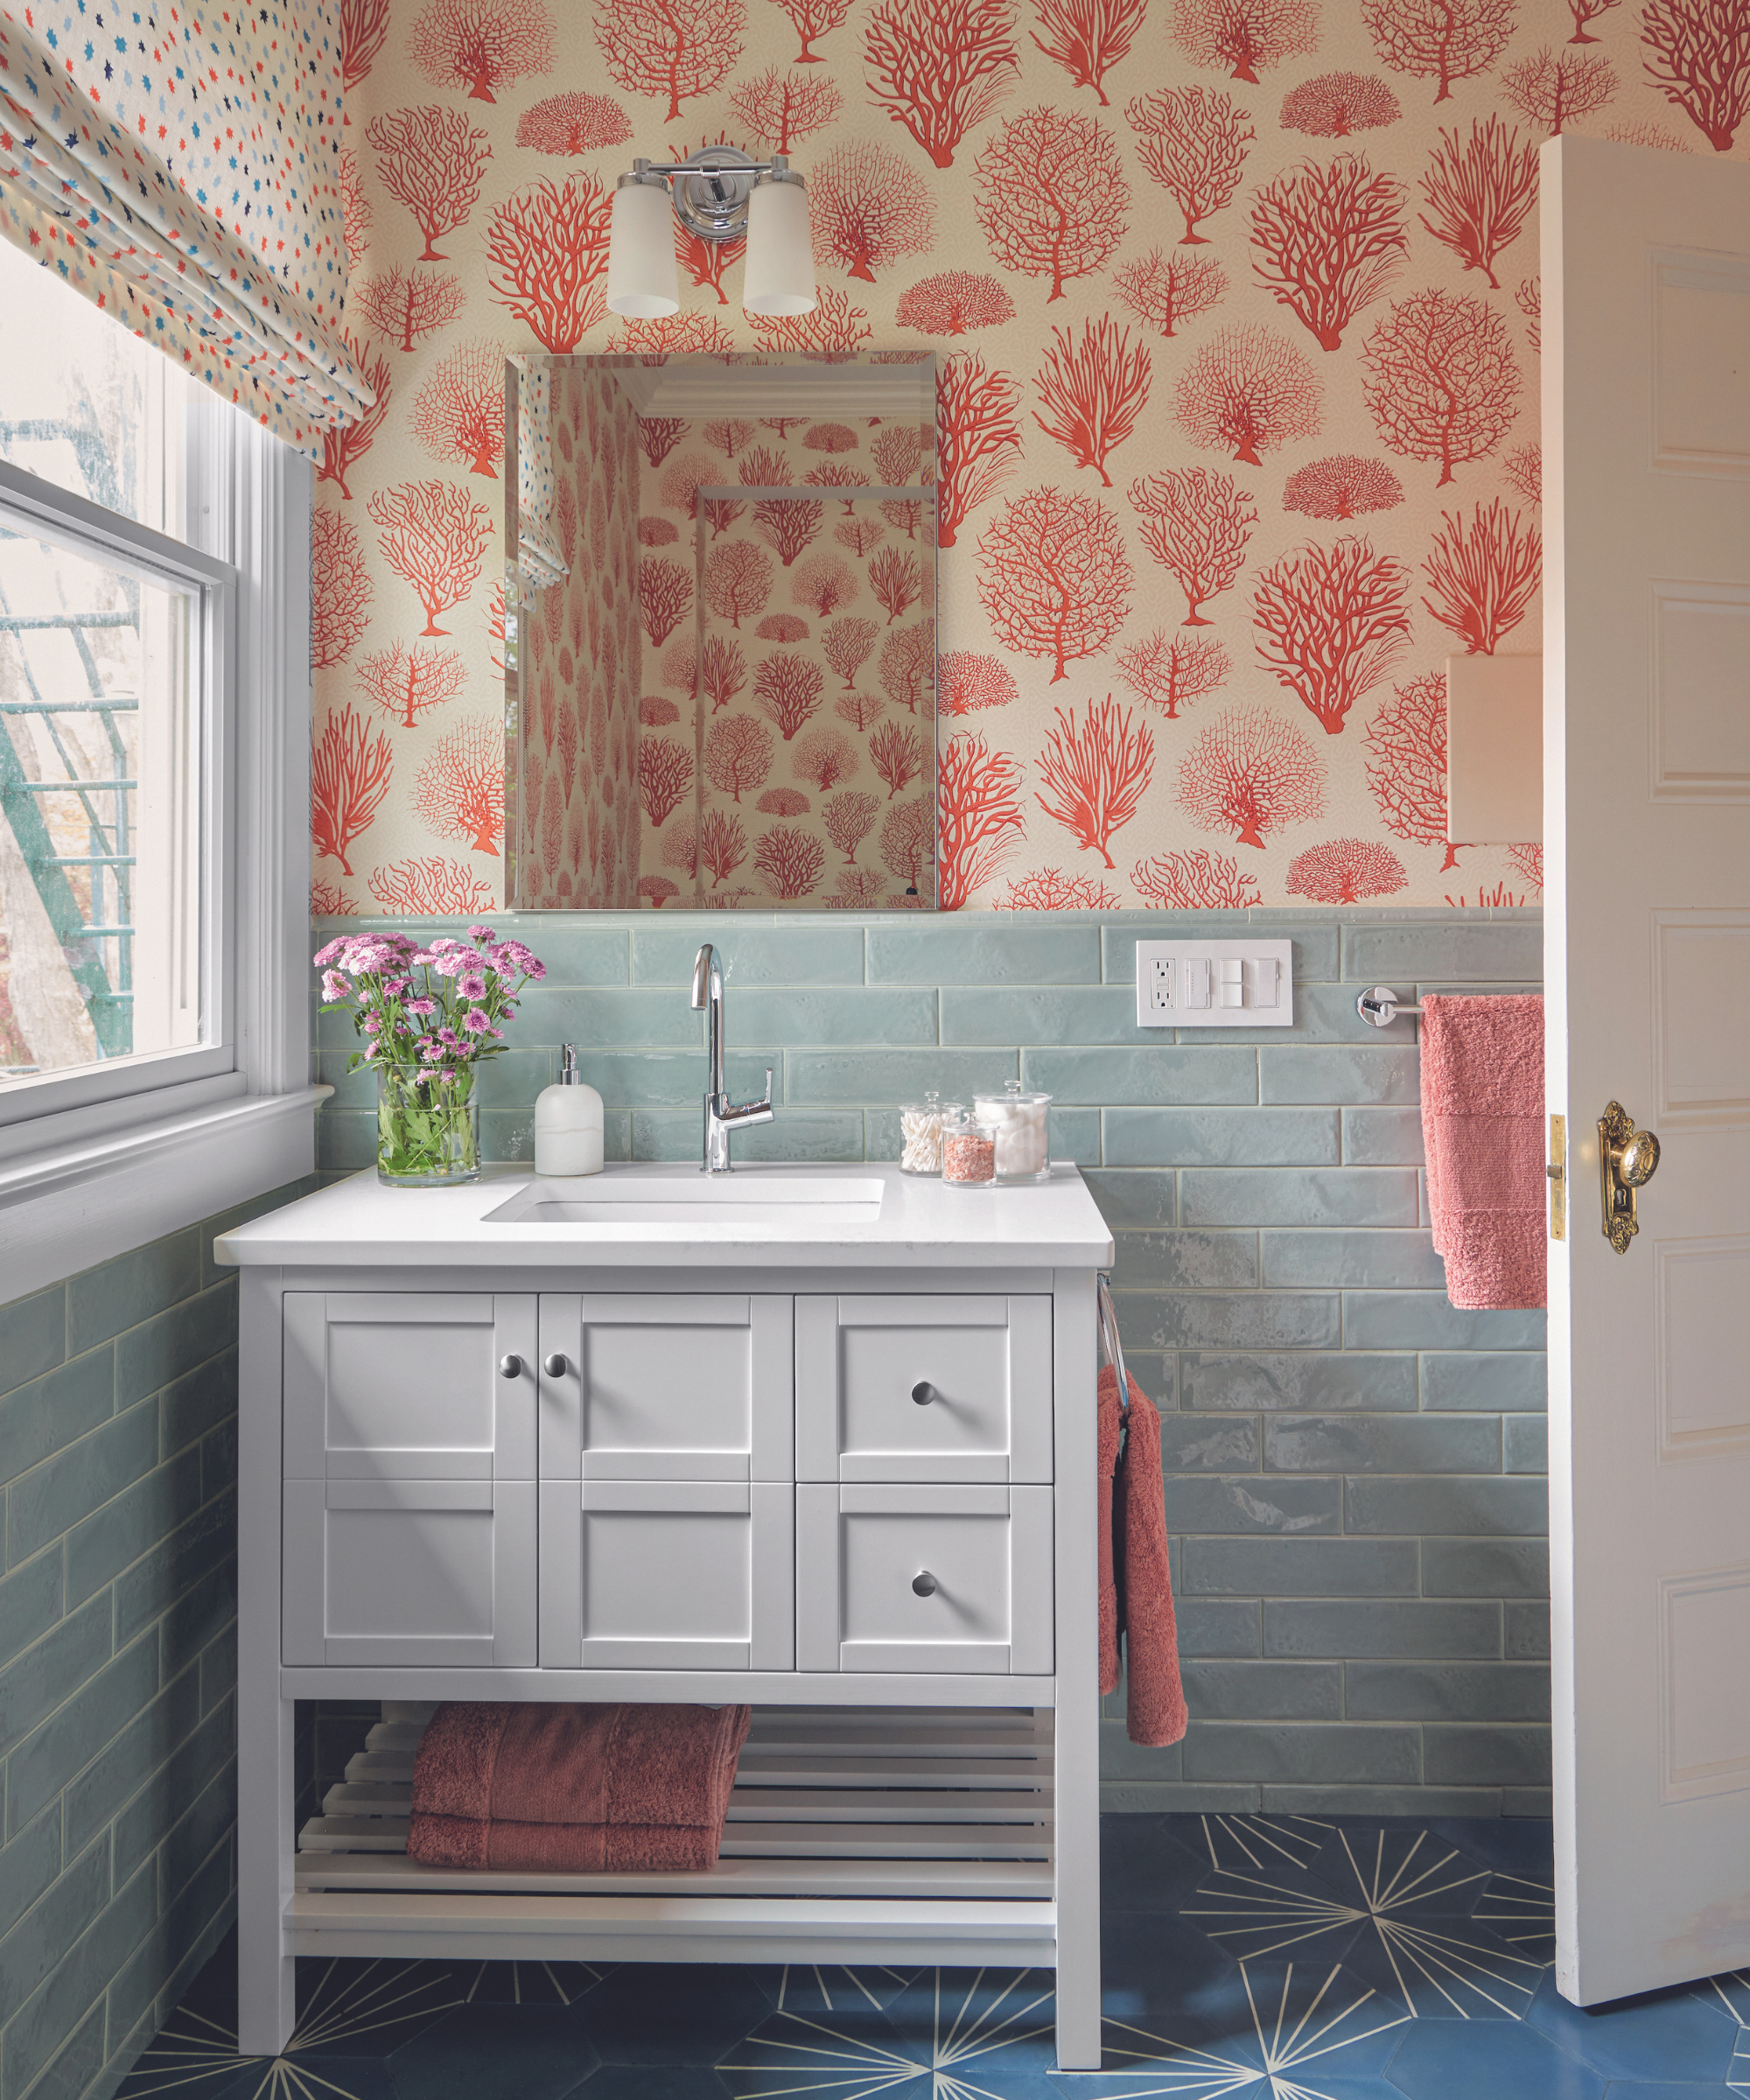 bathroom with seaweed print wallpaper in red with blue tiles and white sink unit and dark blue star pattern flooring